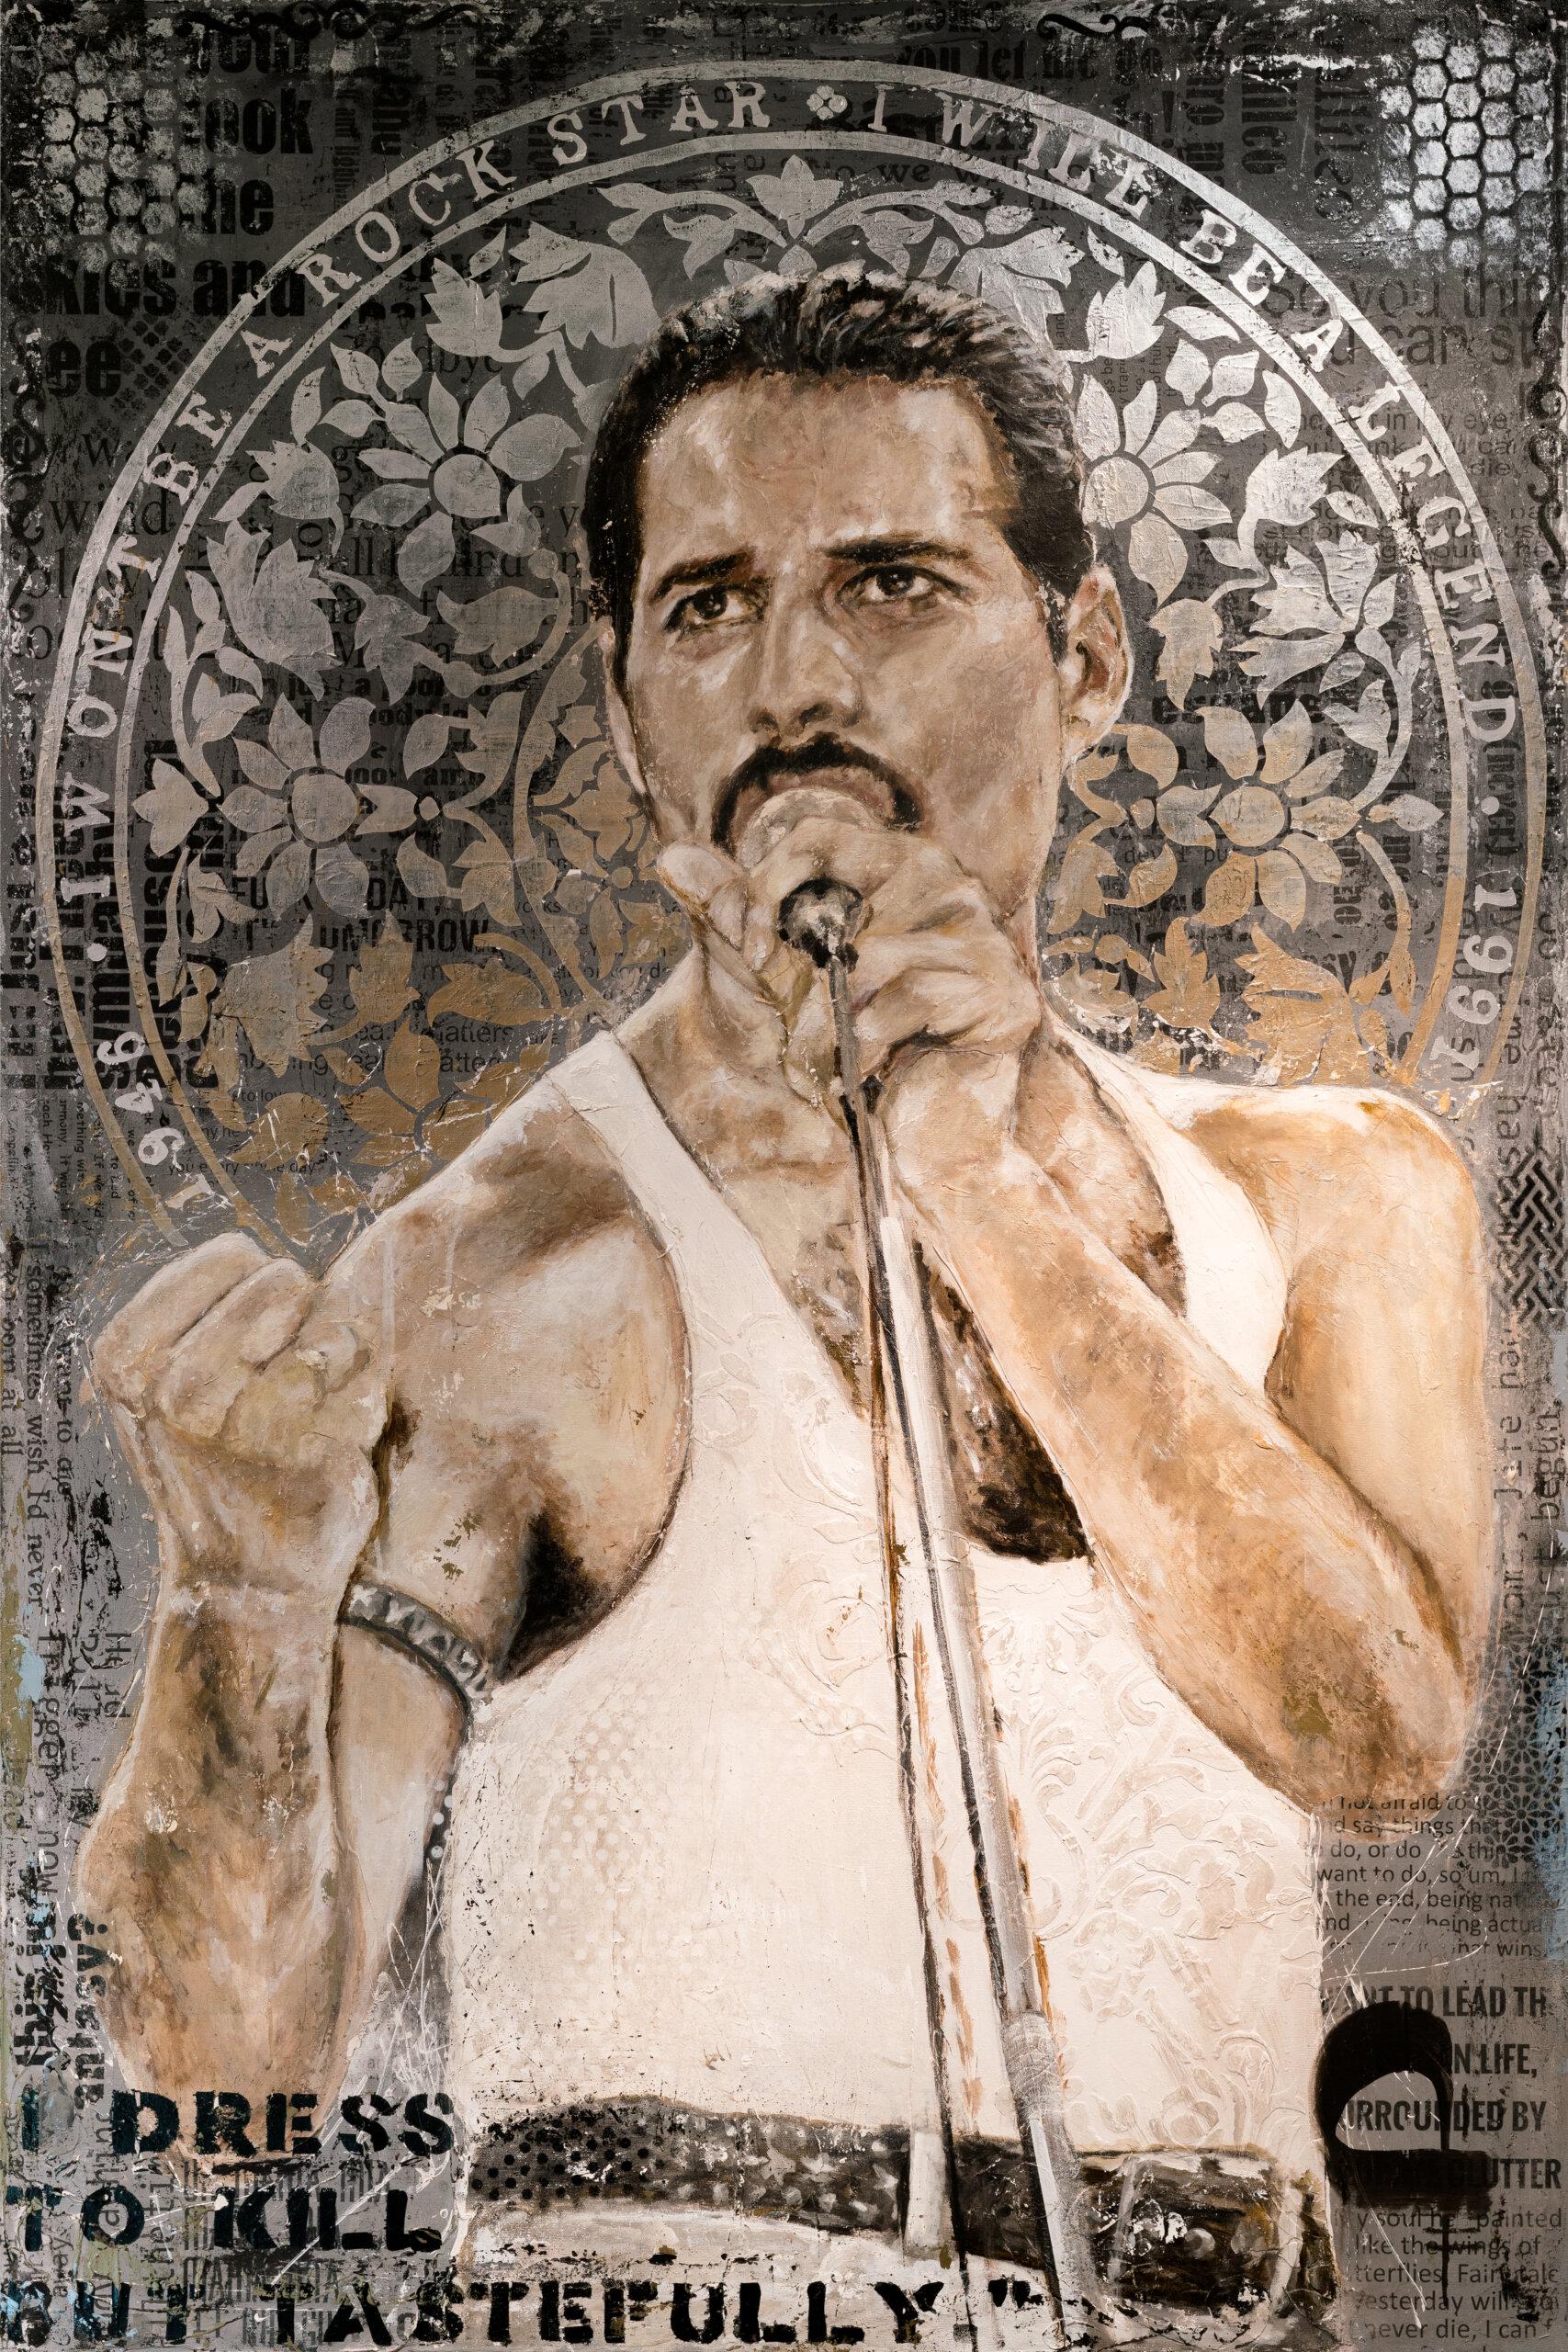 FREDDIE
In this 40” x 60” canvas FREDDIE, Labarca draws inspiration from Queen’s performance at Live Aid at Wembley Stadium in London on the 13th of July, 1985. The most defining moment of the performance was when Freddie Mercury sang Bohemian